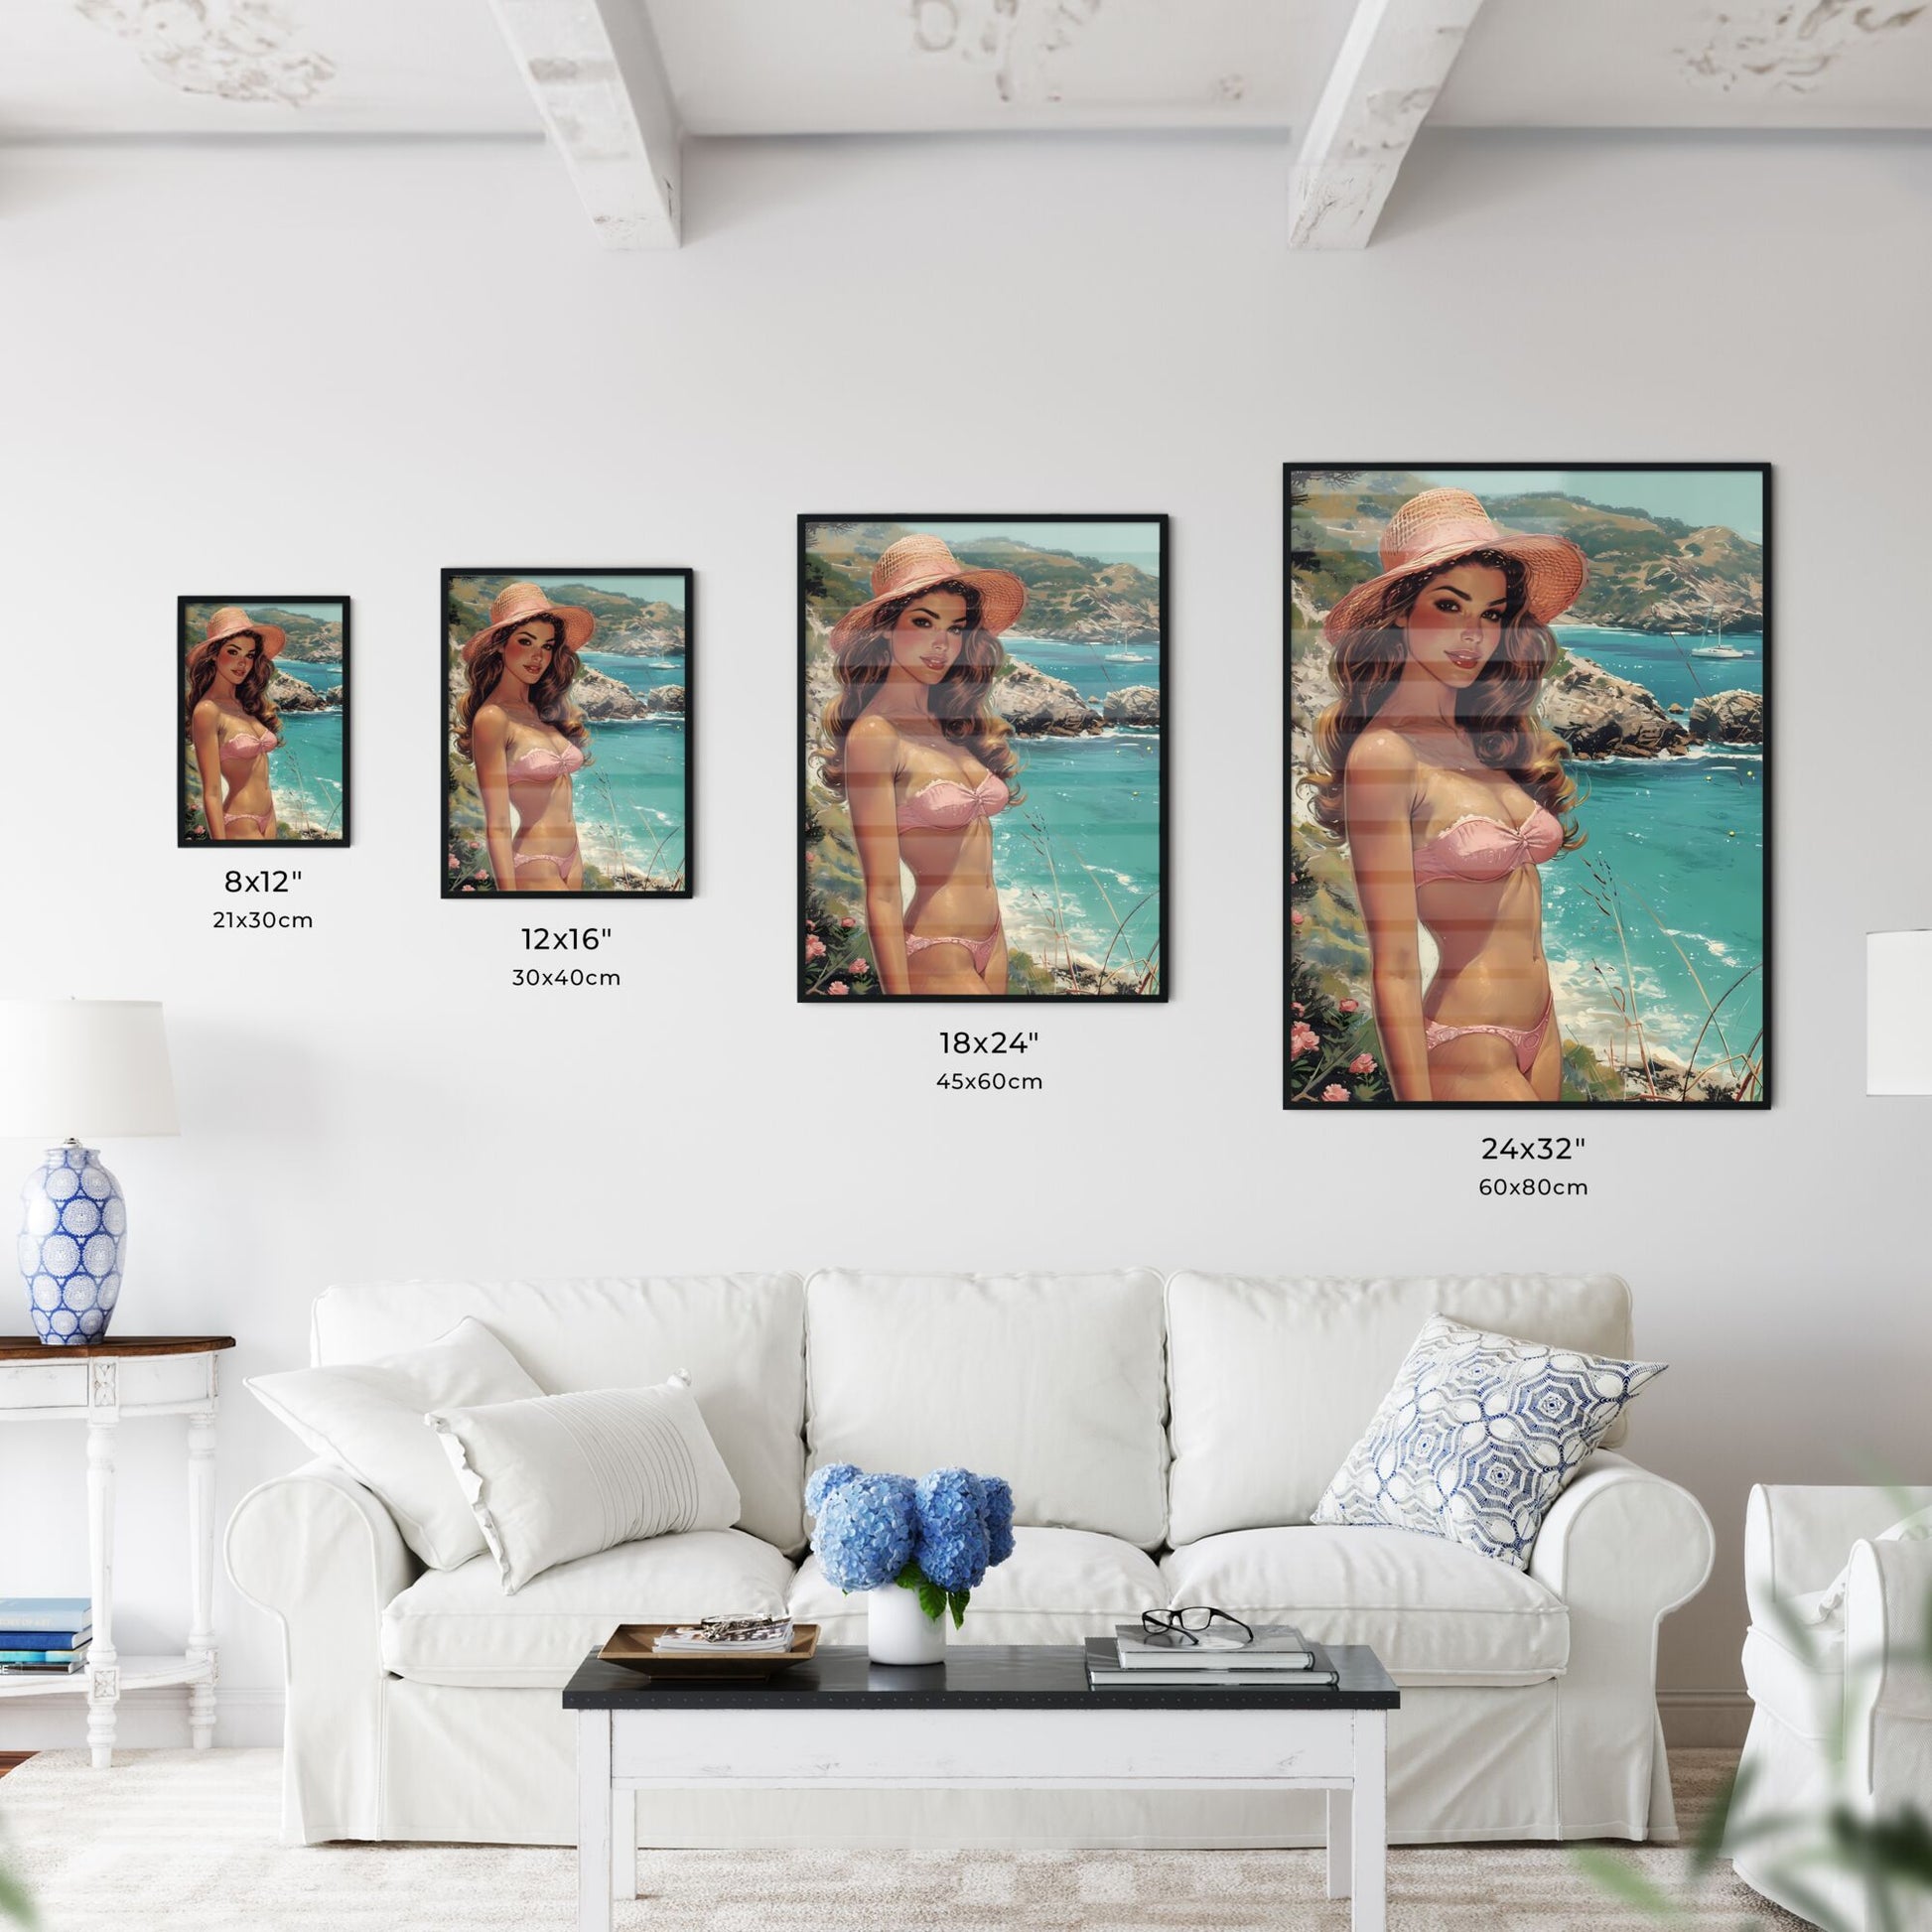 Sea Print, Coastal Painting - Art print of a woman in a garment and hat standing on a beach Default Title